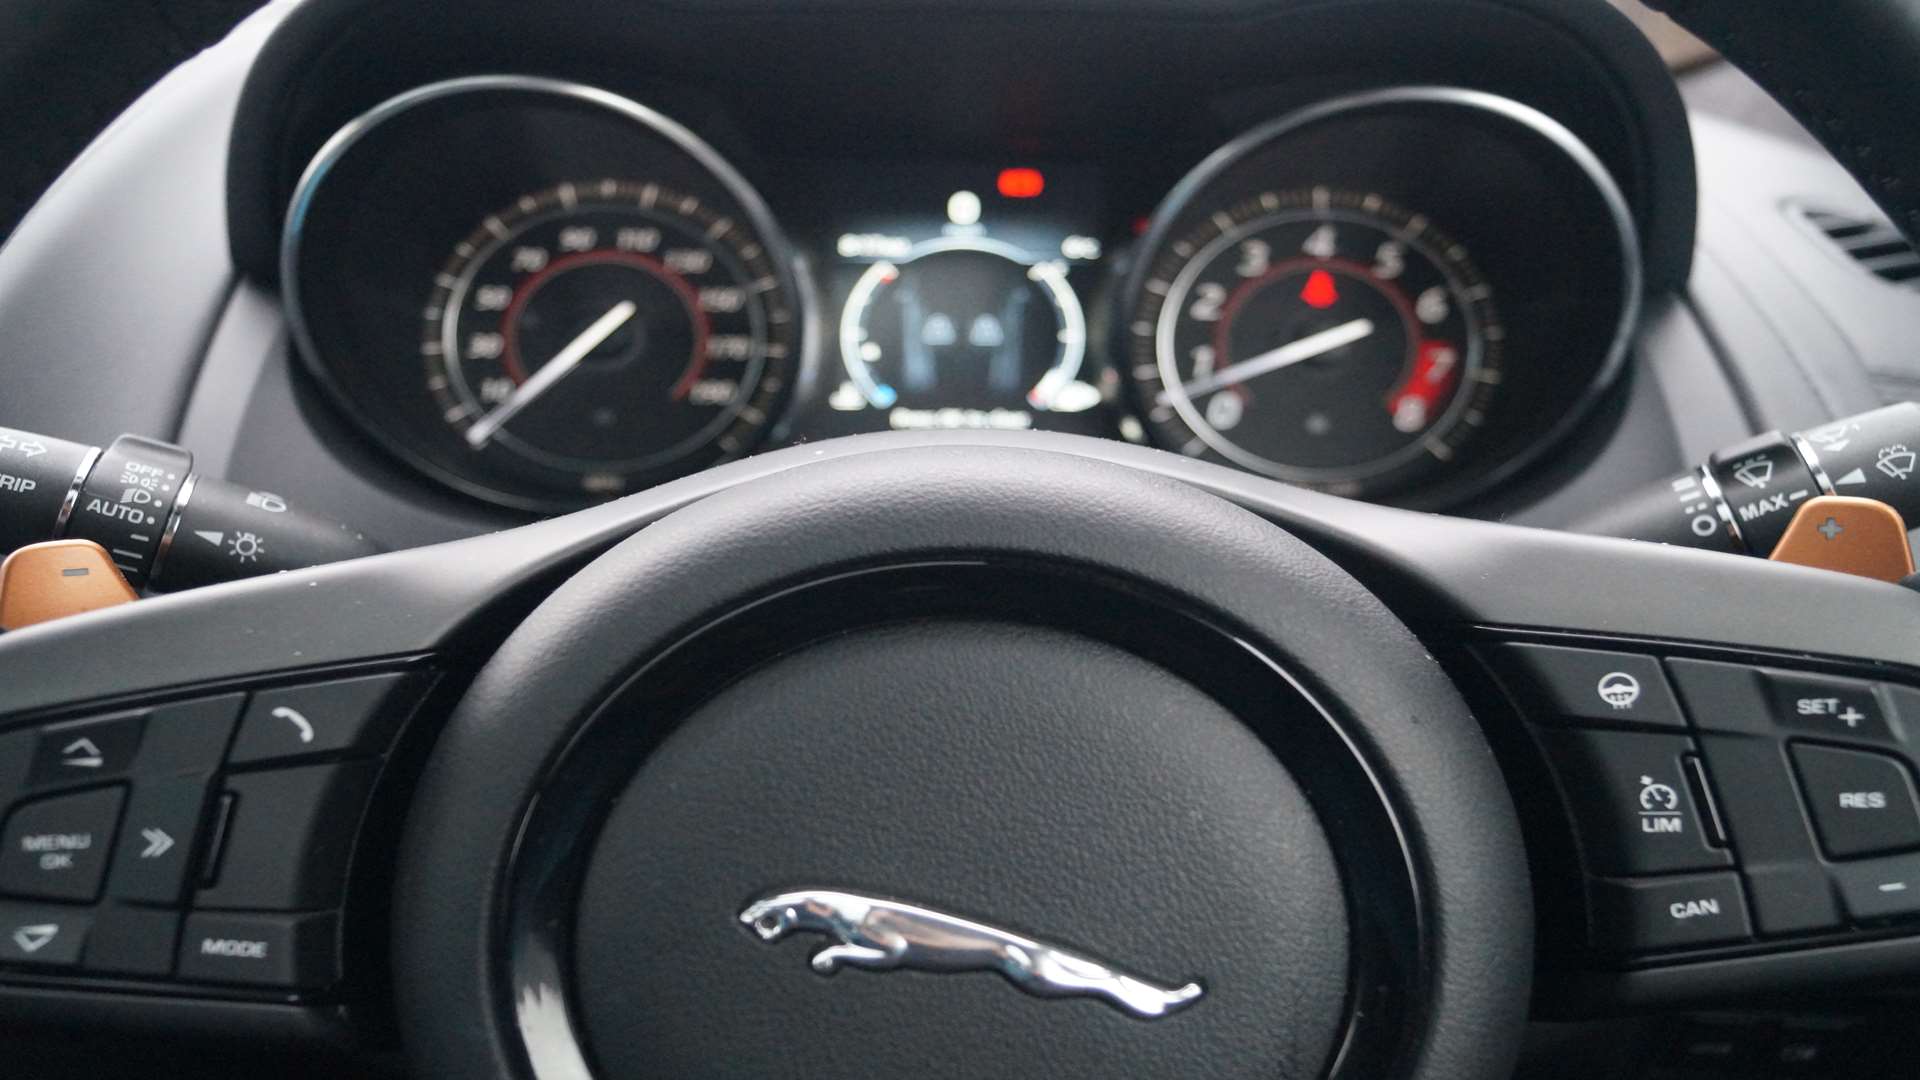 Behind the wheel of an F Type is undoubtedly one of the best places to be